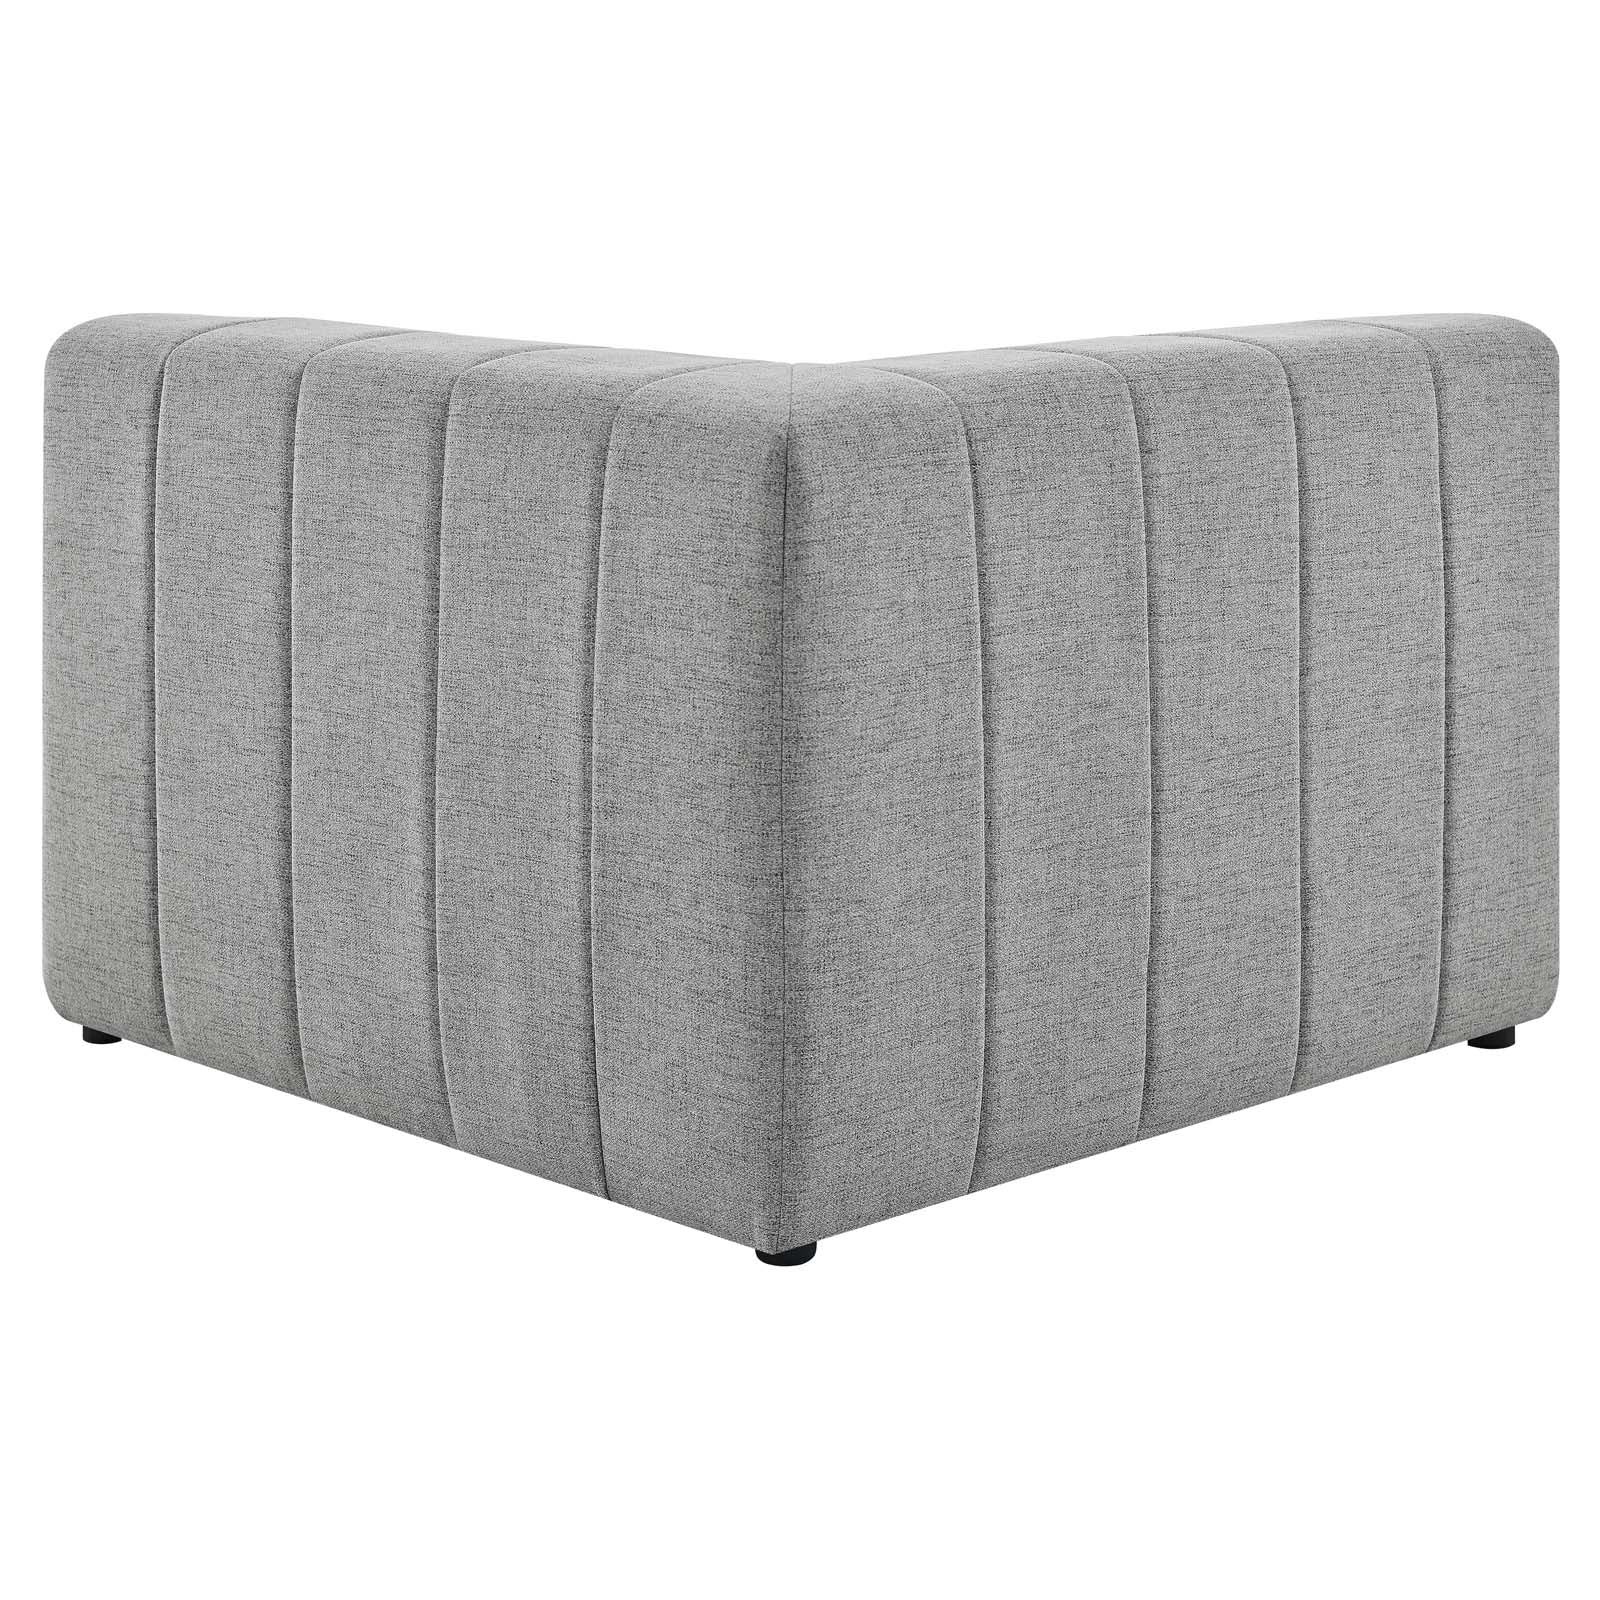 Modway Accent Chairs - Bartlett Upholstered Fabric Corner Chair Light Gray